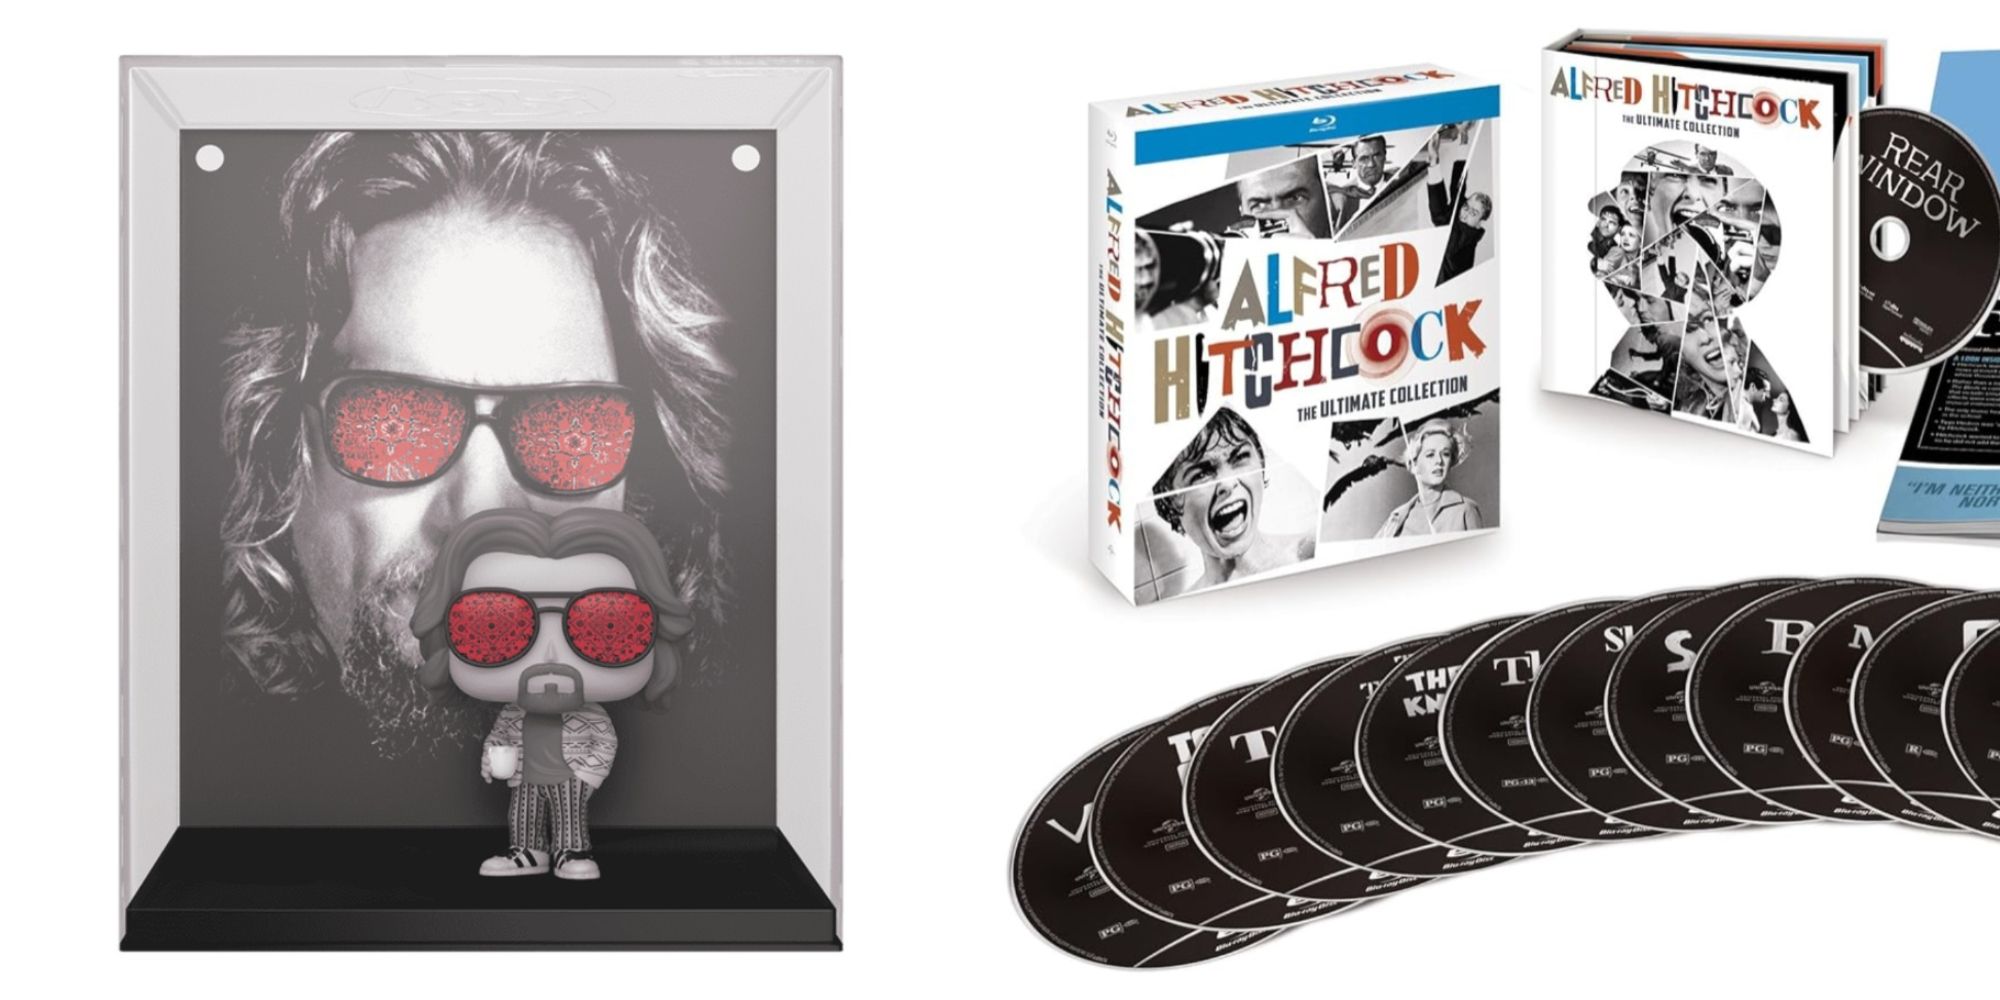 Gifts For Movie Fans Featured Split Image Dude Funko Pop and Alfred Hitchcock Collection